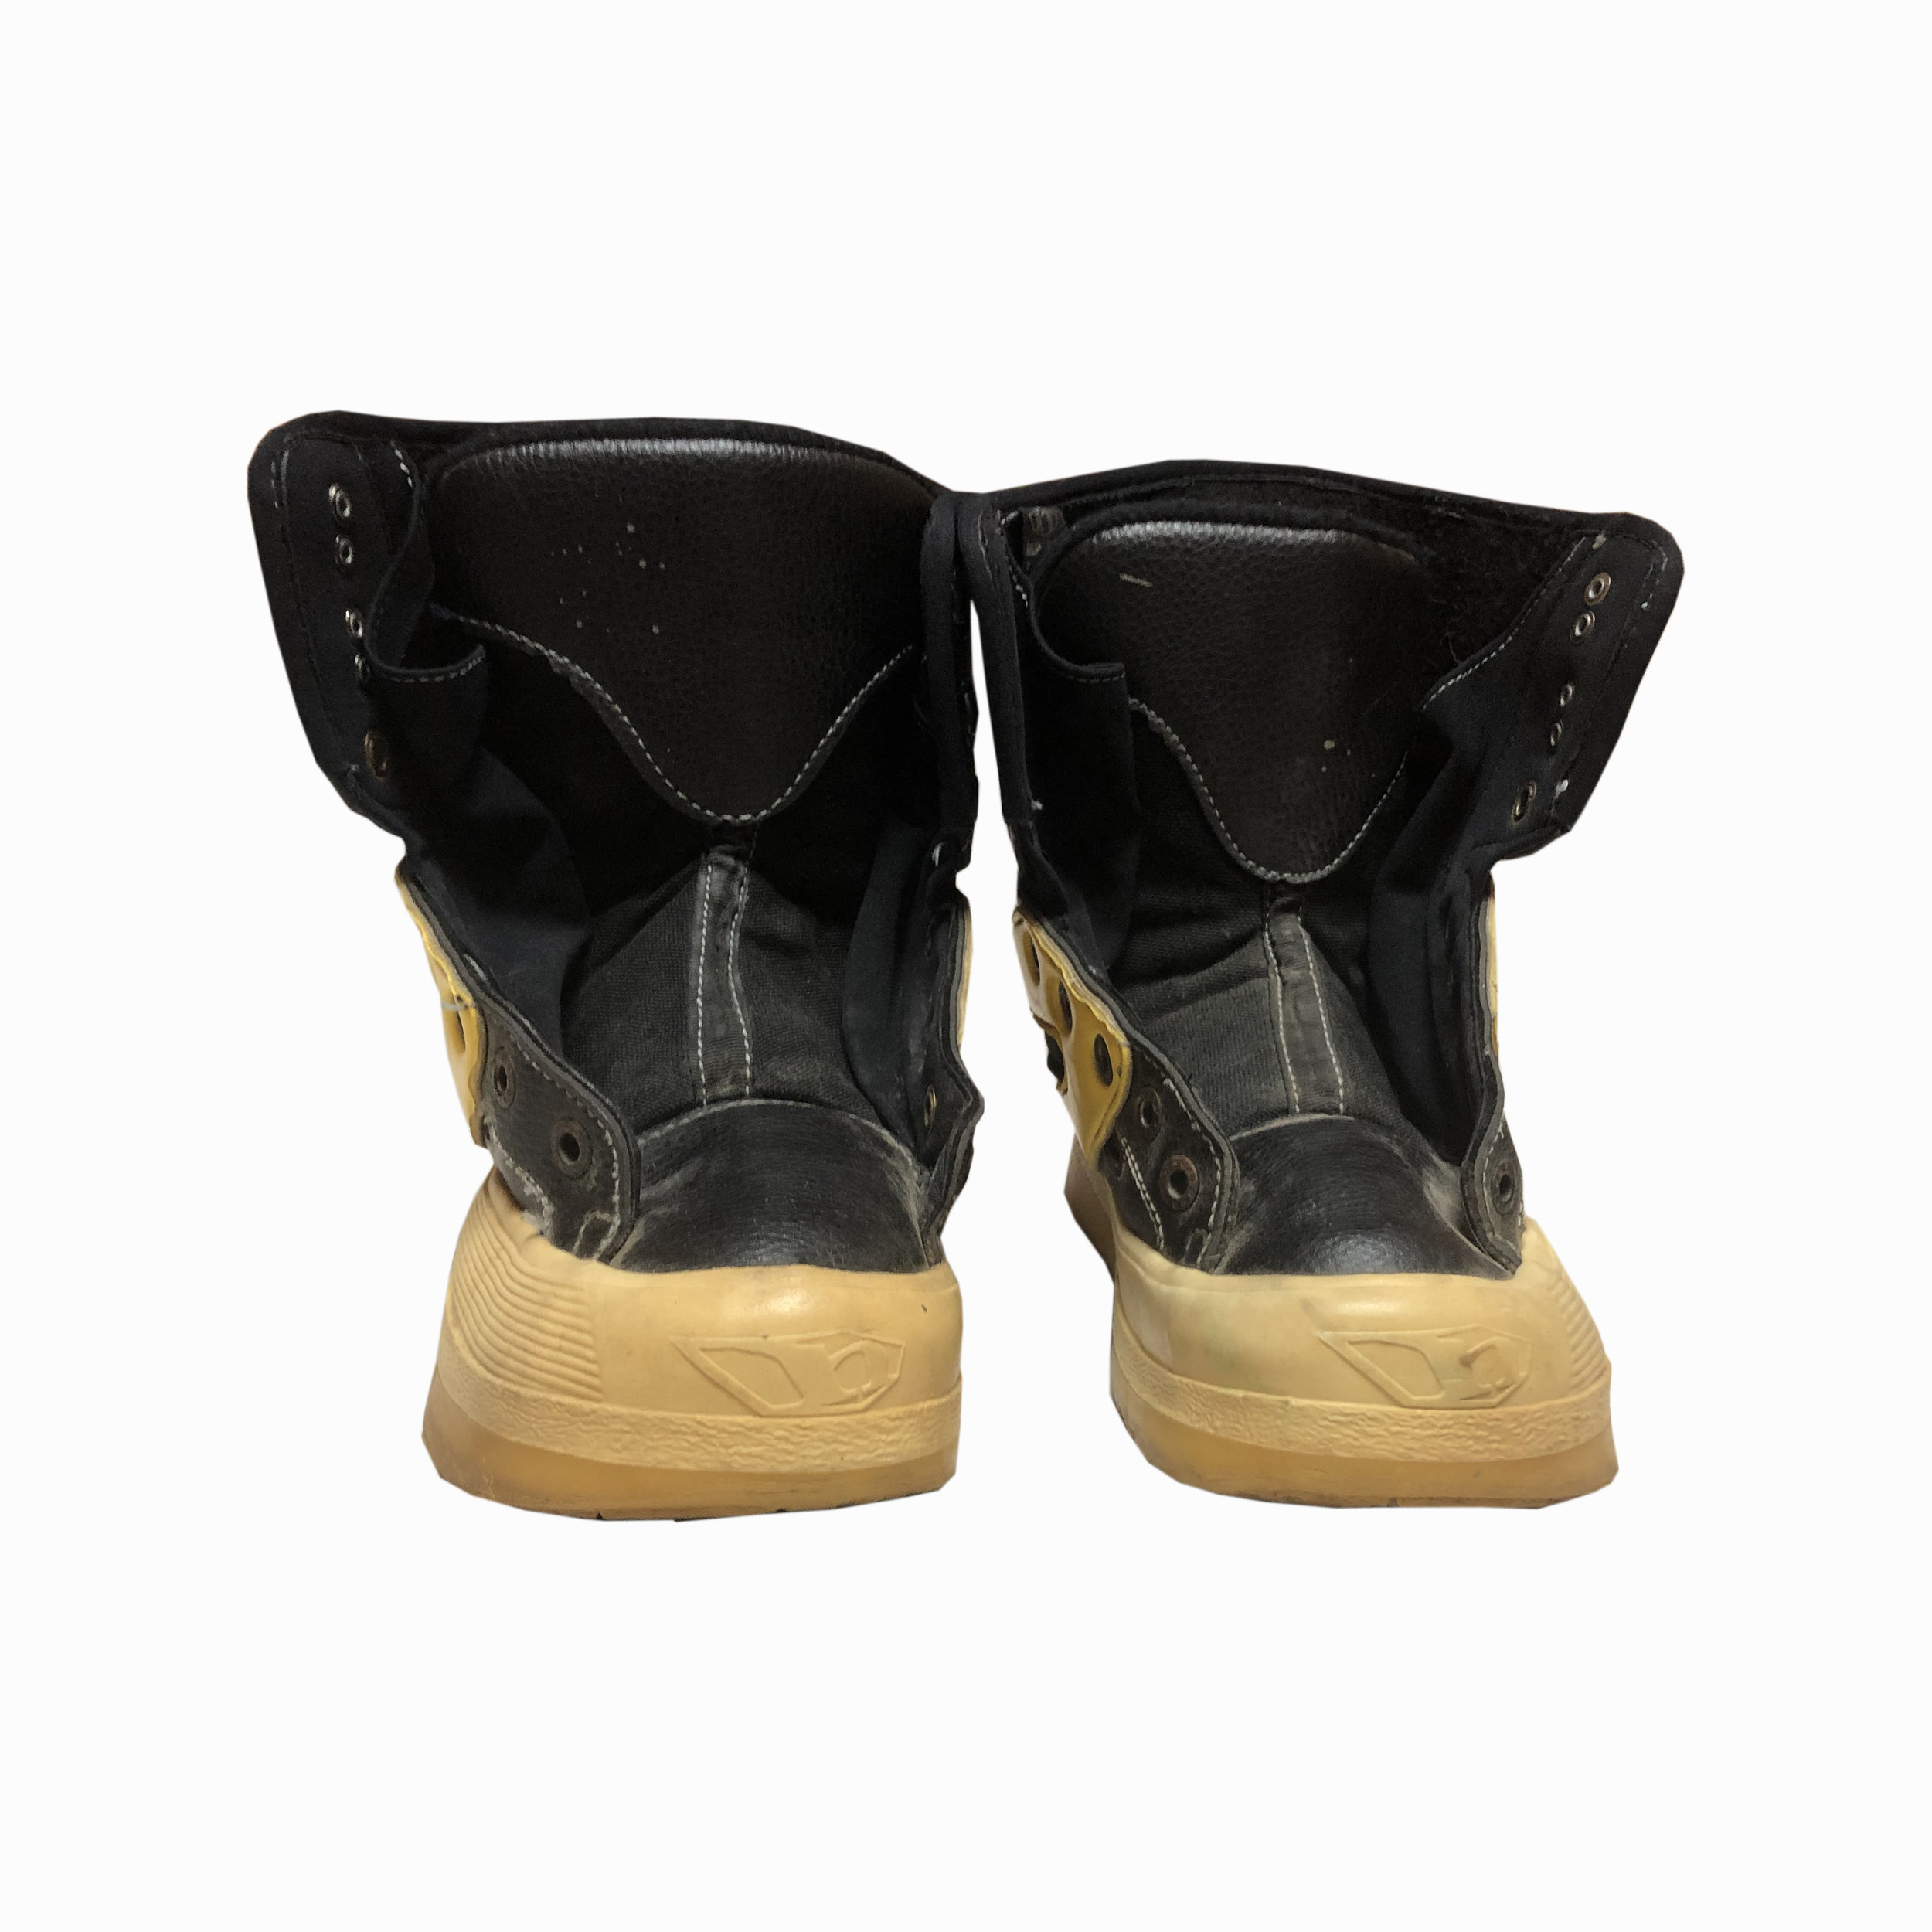 ARCHIVE NORTHWAVE SNOWBOARD BOOTS 